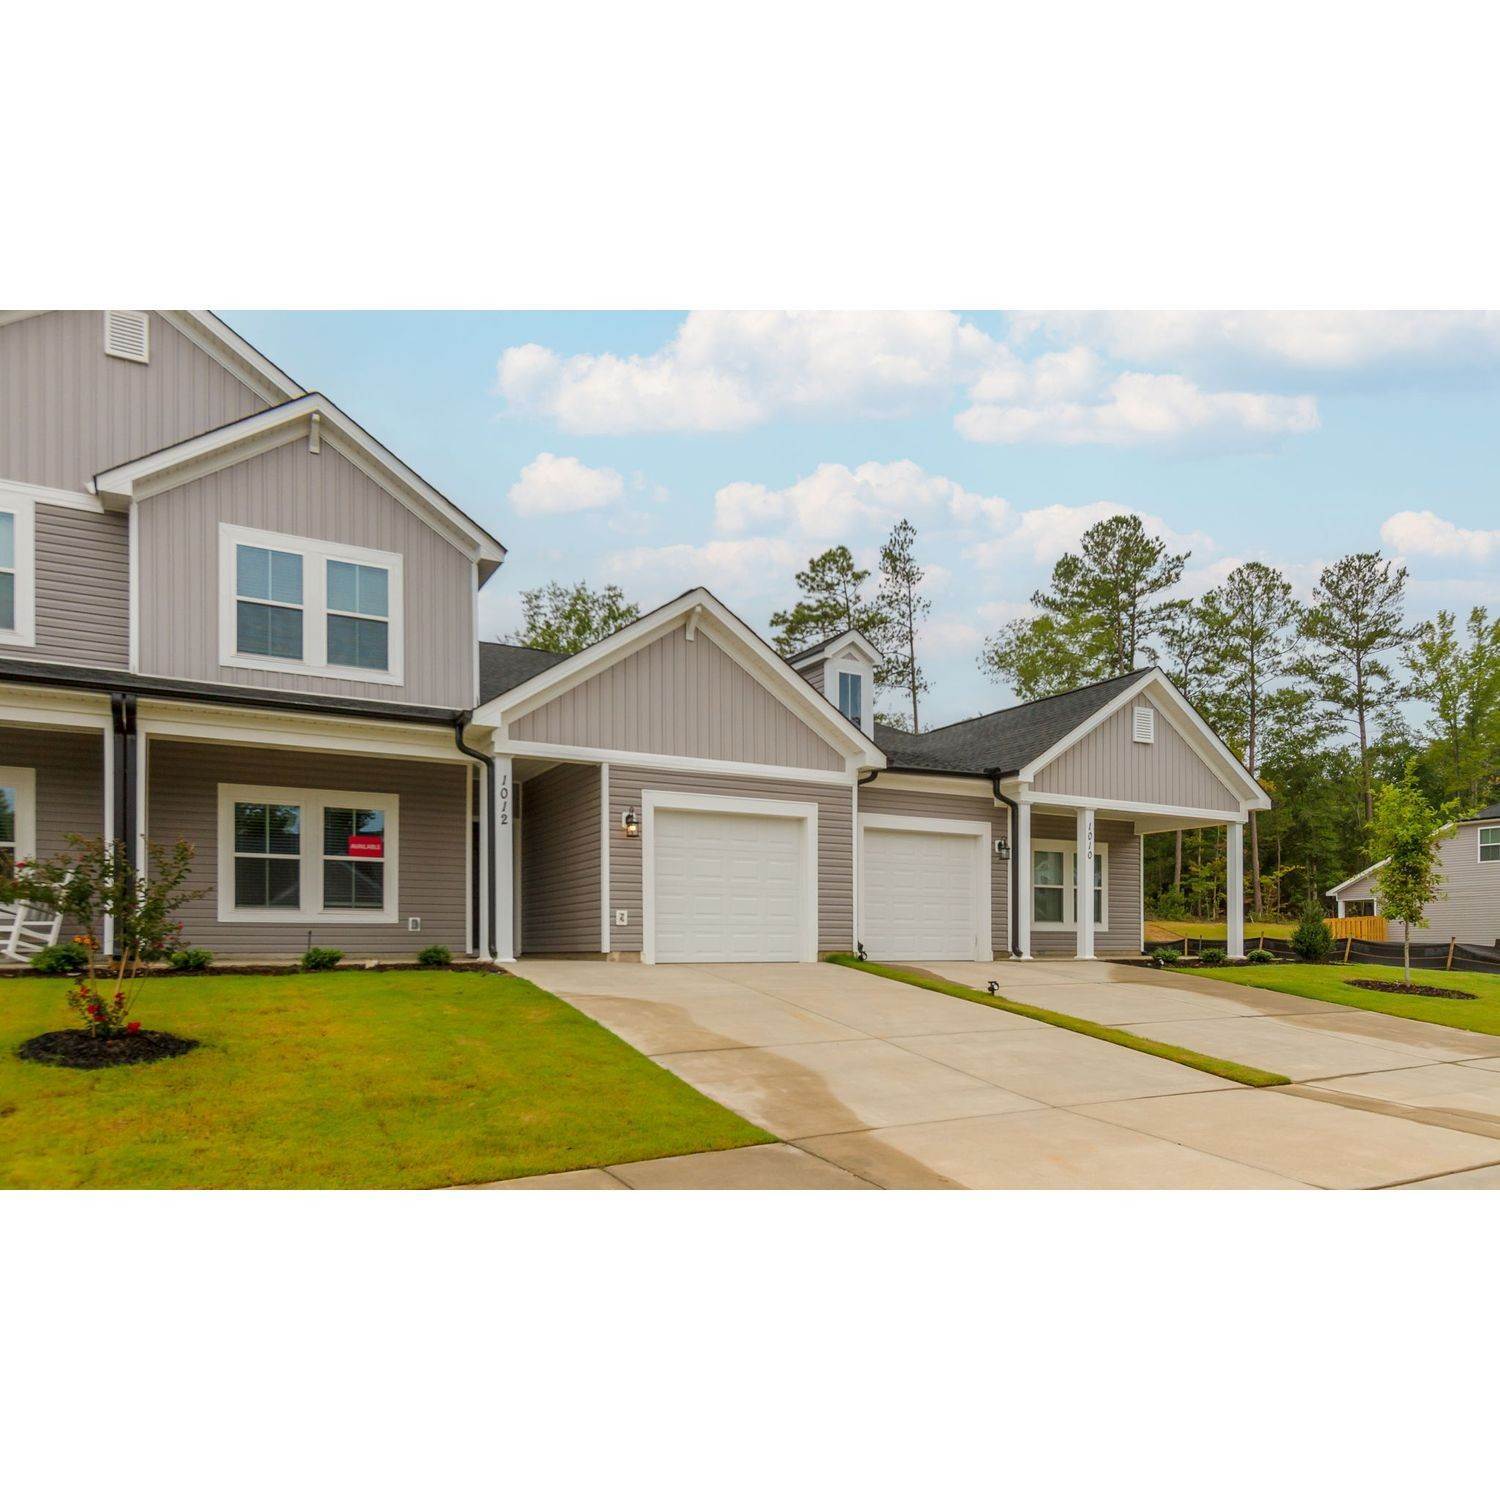 7. Windsor Townhomes building at 594 Hampton Drive, North Augusta, SC 29860